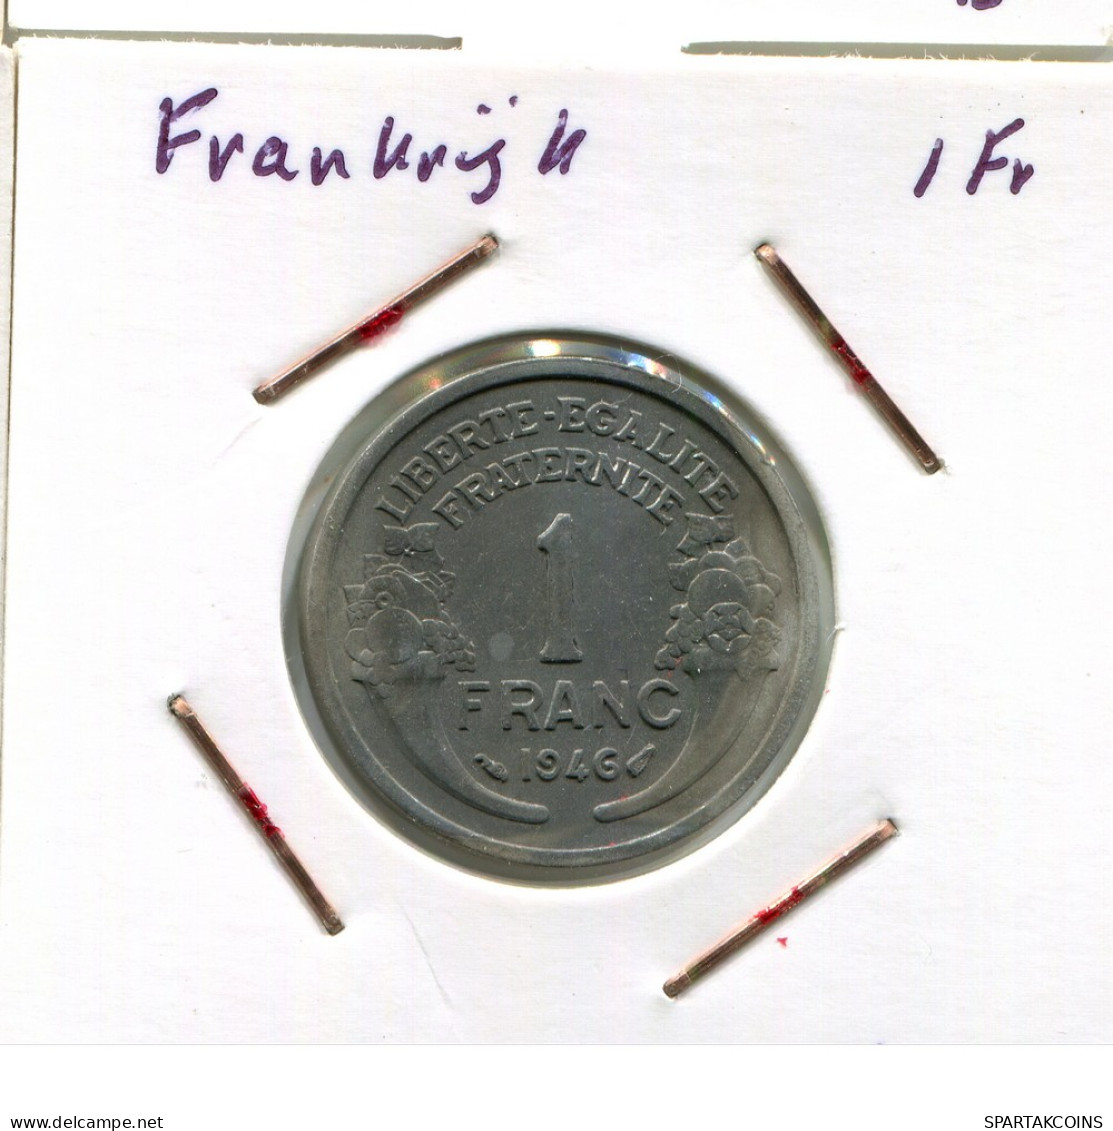 1 FRANC 1946 FRANCE Coin French Coin #AM549 - 1 Franc